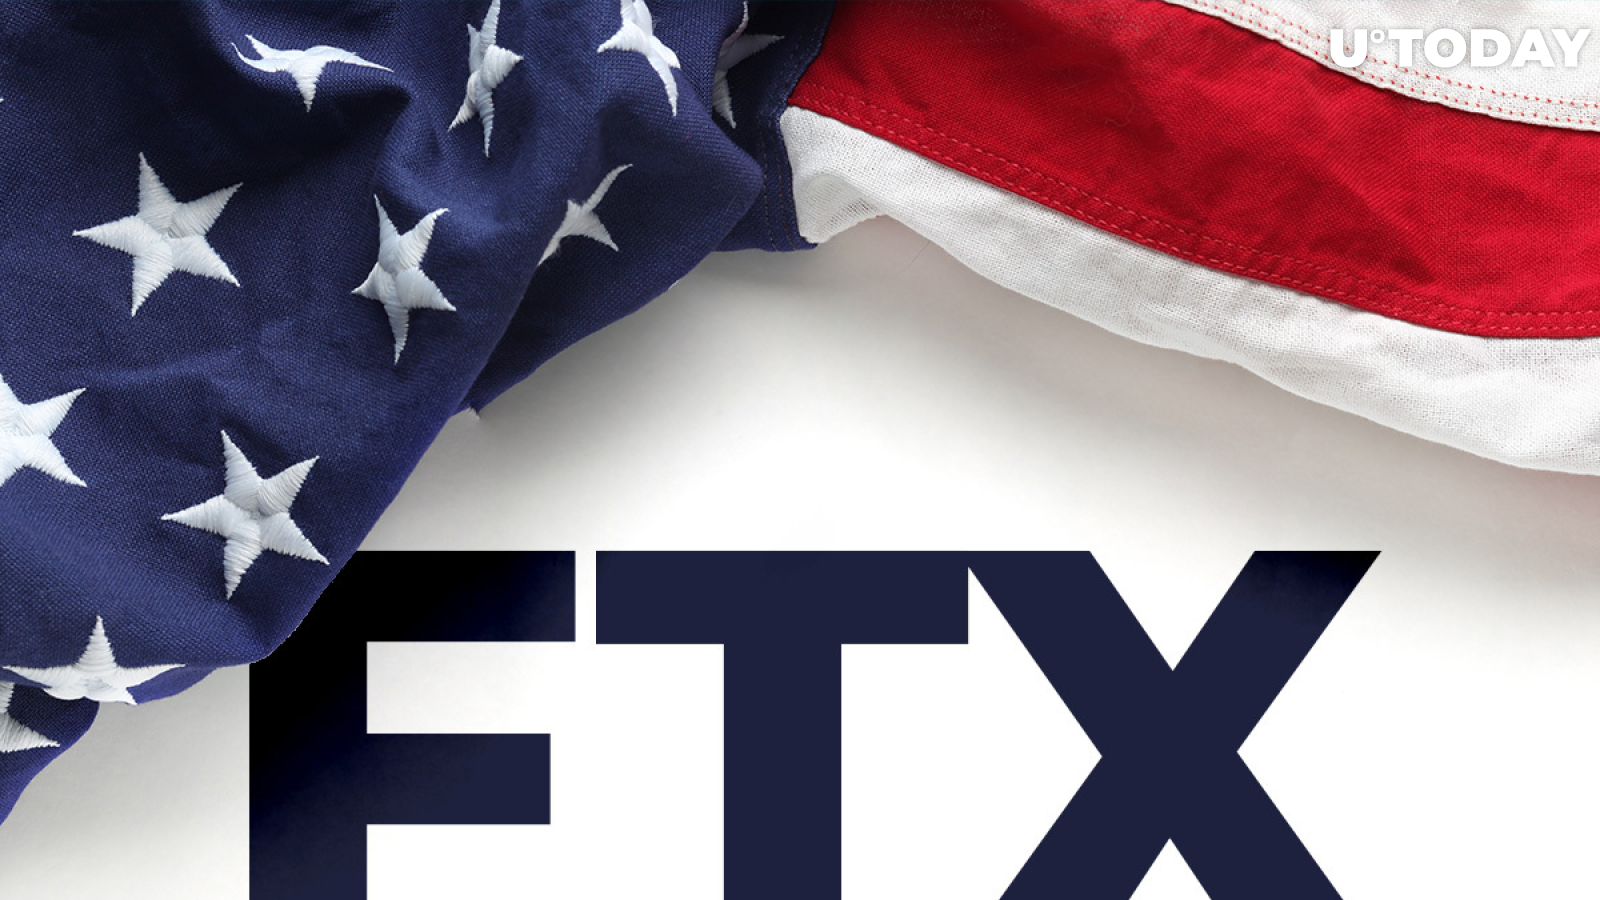 FTX Seeks to Establish Substantial Presence in U.S. with Miami Office